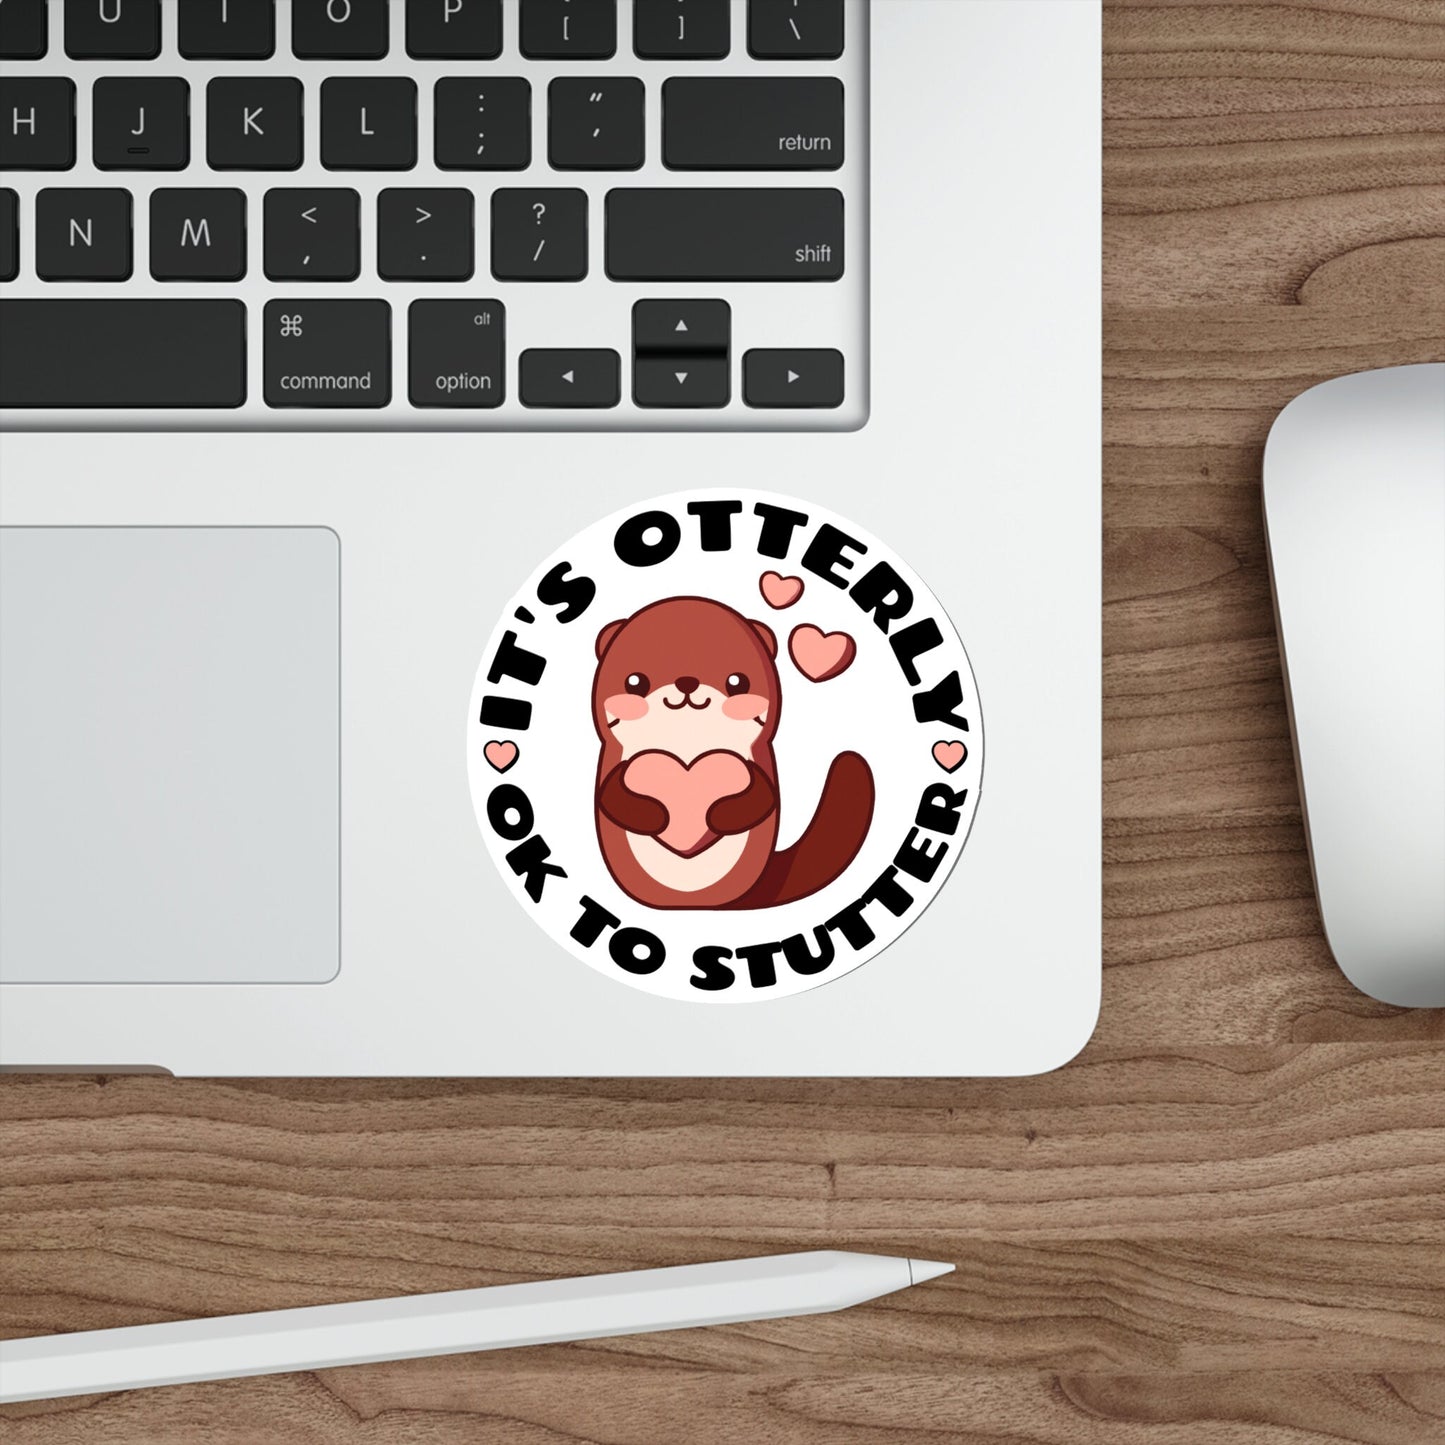 It's Otterly OK to Stutter Sticker, 2", 3", 4" or 5"